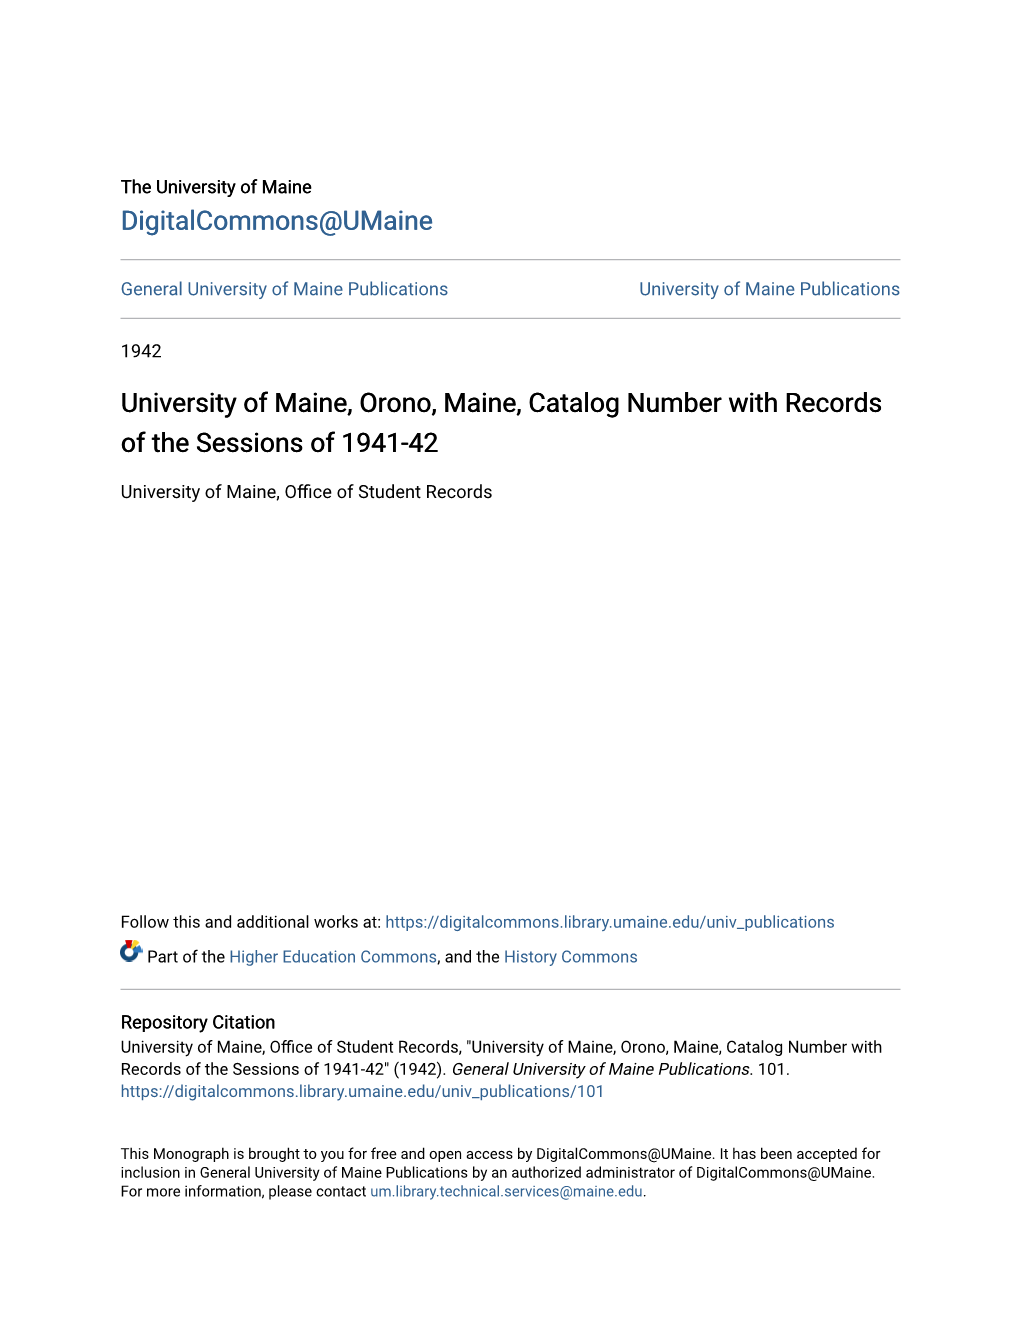 University of Maine, Orono, Maine, Catalog Number with Records of the Sessions of 1941-42